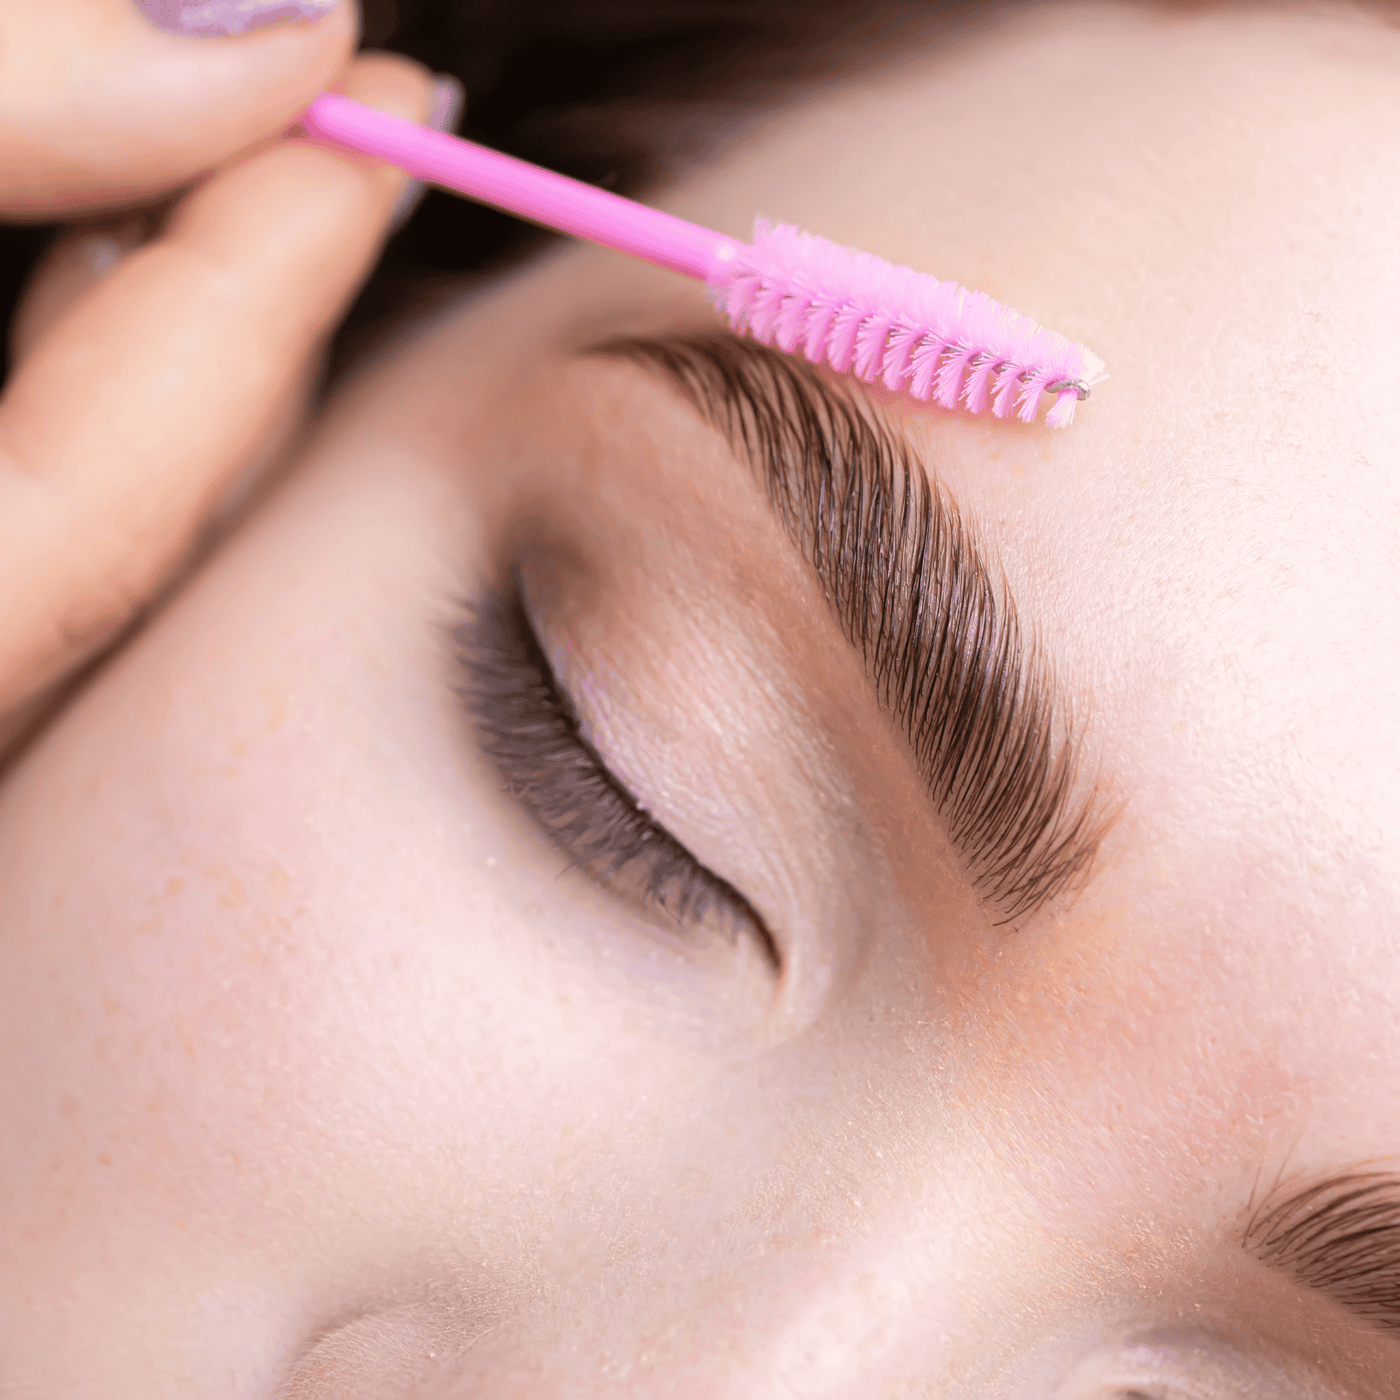 Beginners Brow Lamination, Waxing and Tinting Course - Liverpool Venue - The London Brow Company